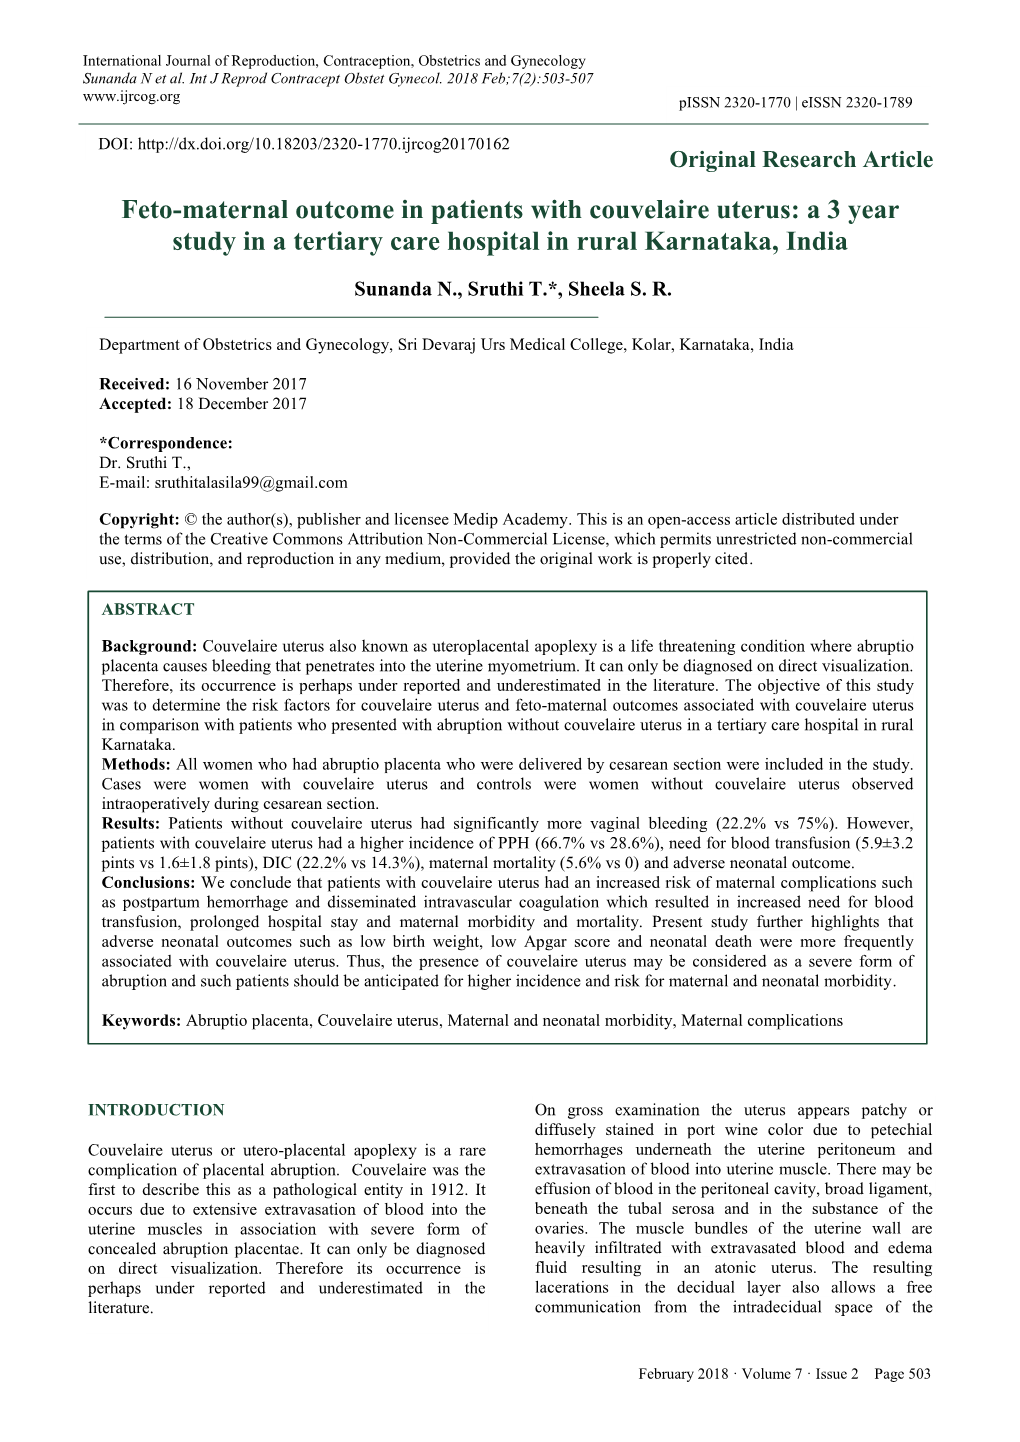 Feto-Maternal Outcome in Patients with Couvelaire Uterus: a 3 Year Study in a Tertiary Care Hospital in Rural Karnataka, India